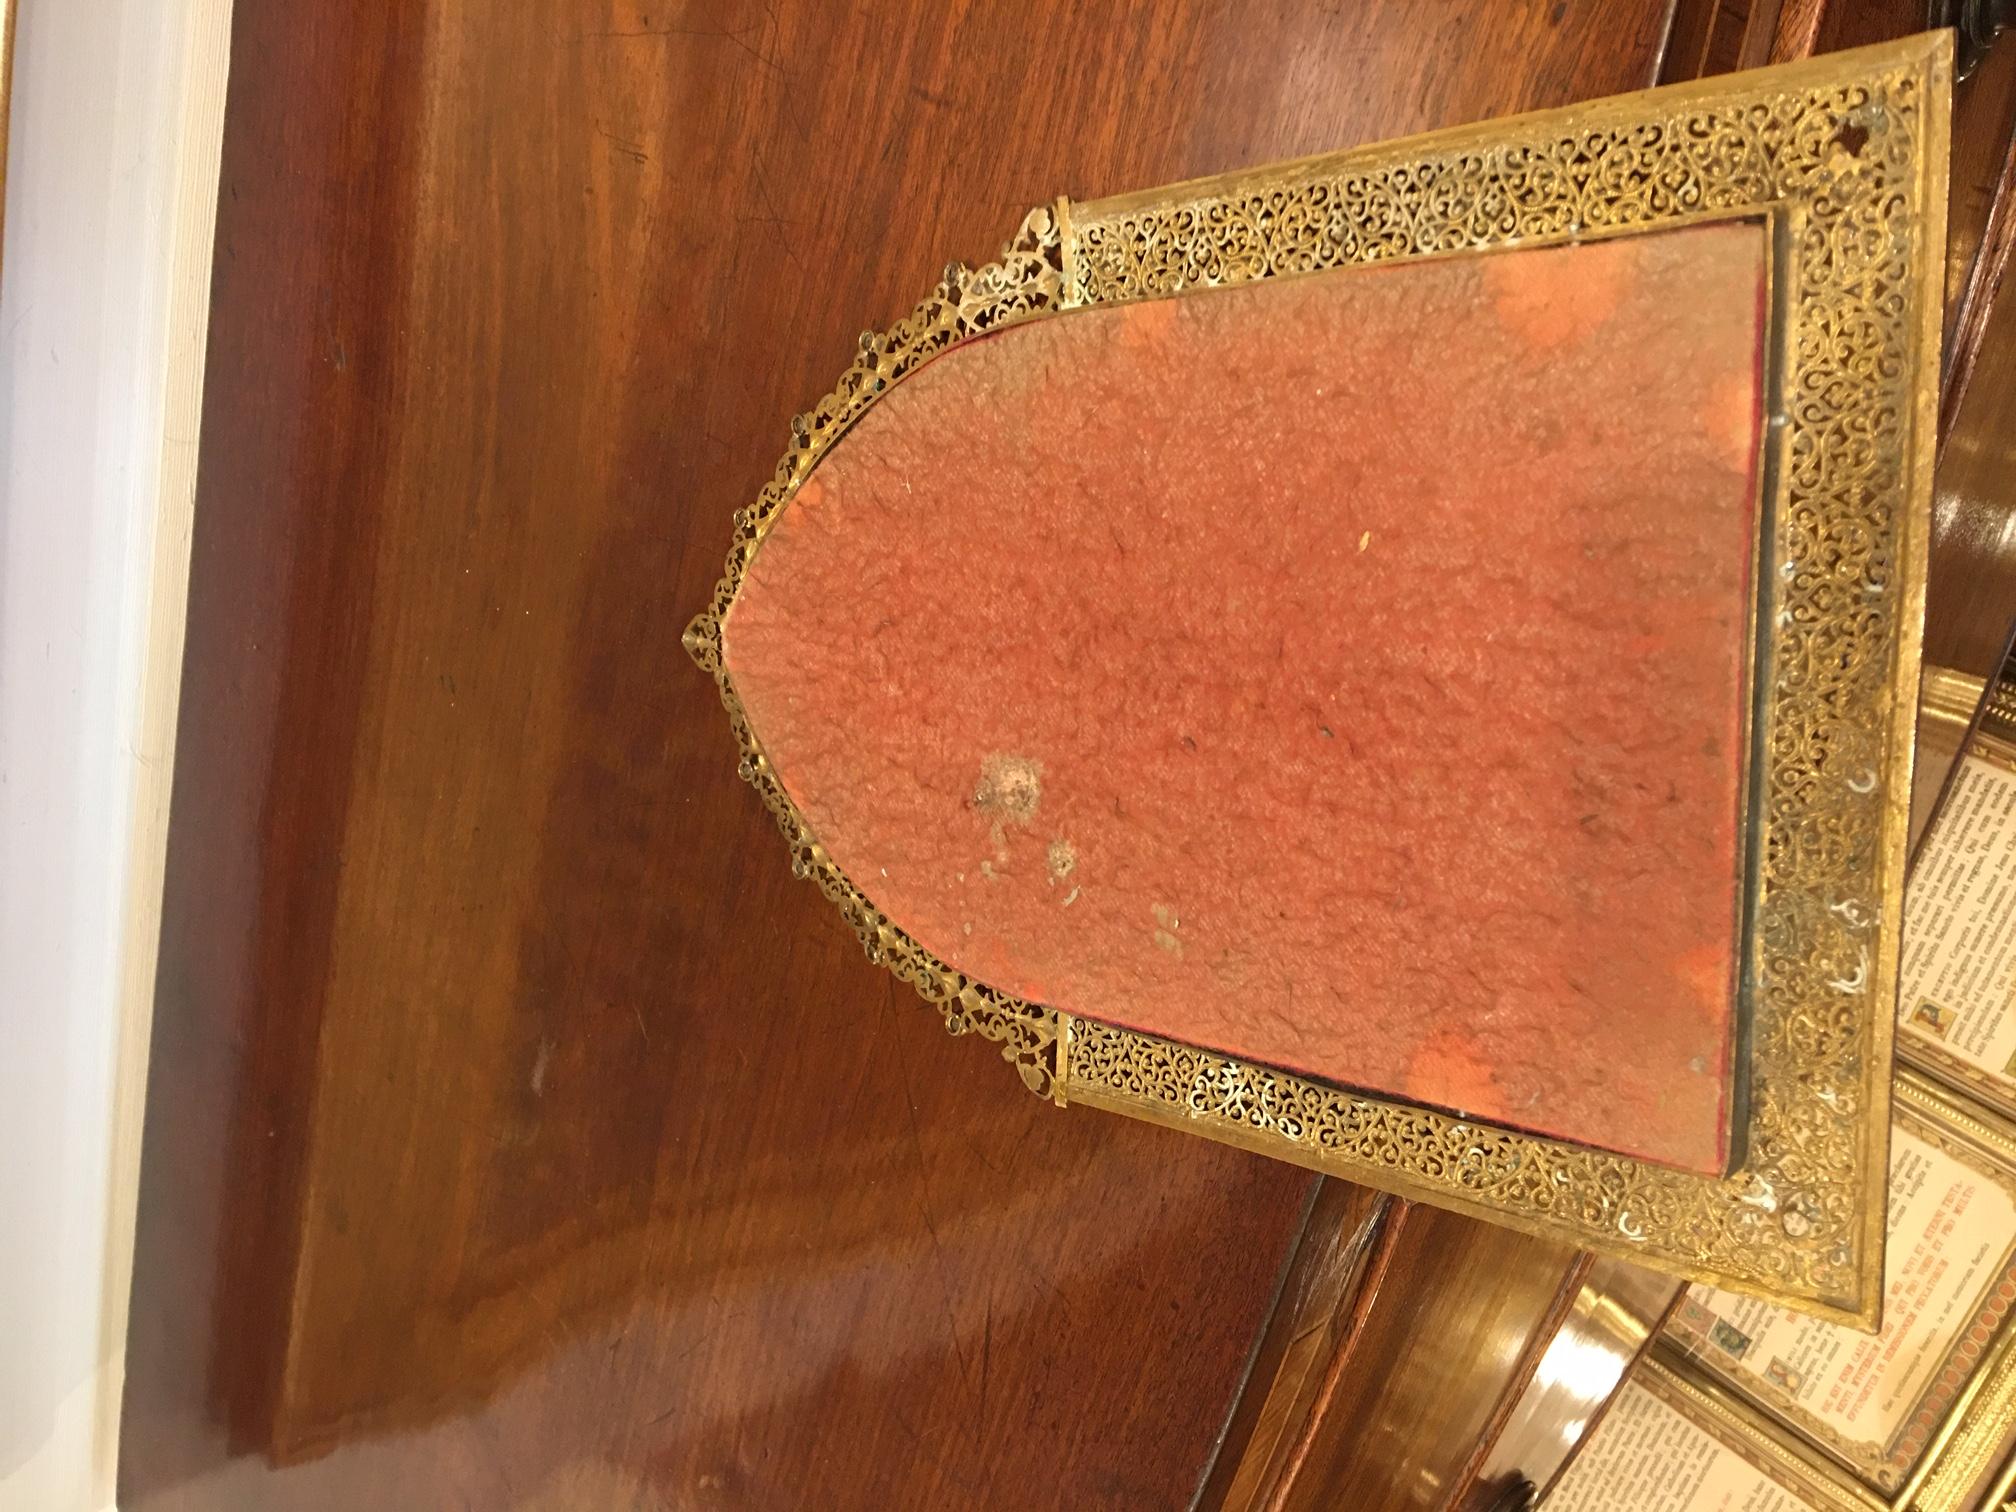 Polished Brass Picture Frame with Decorative Trim Around, 19th Century 4